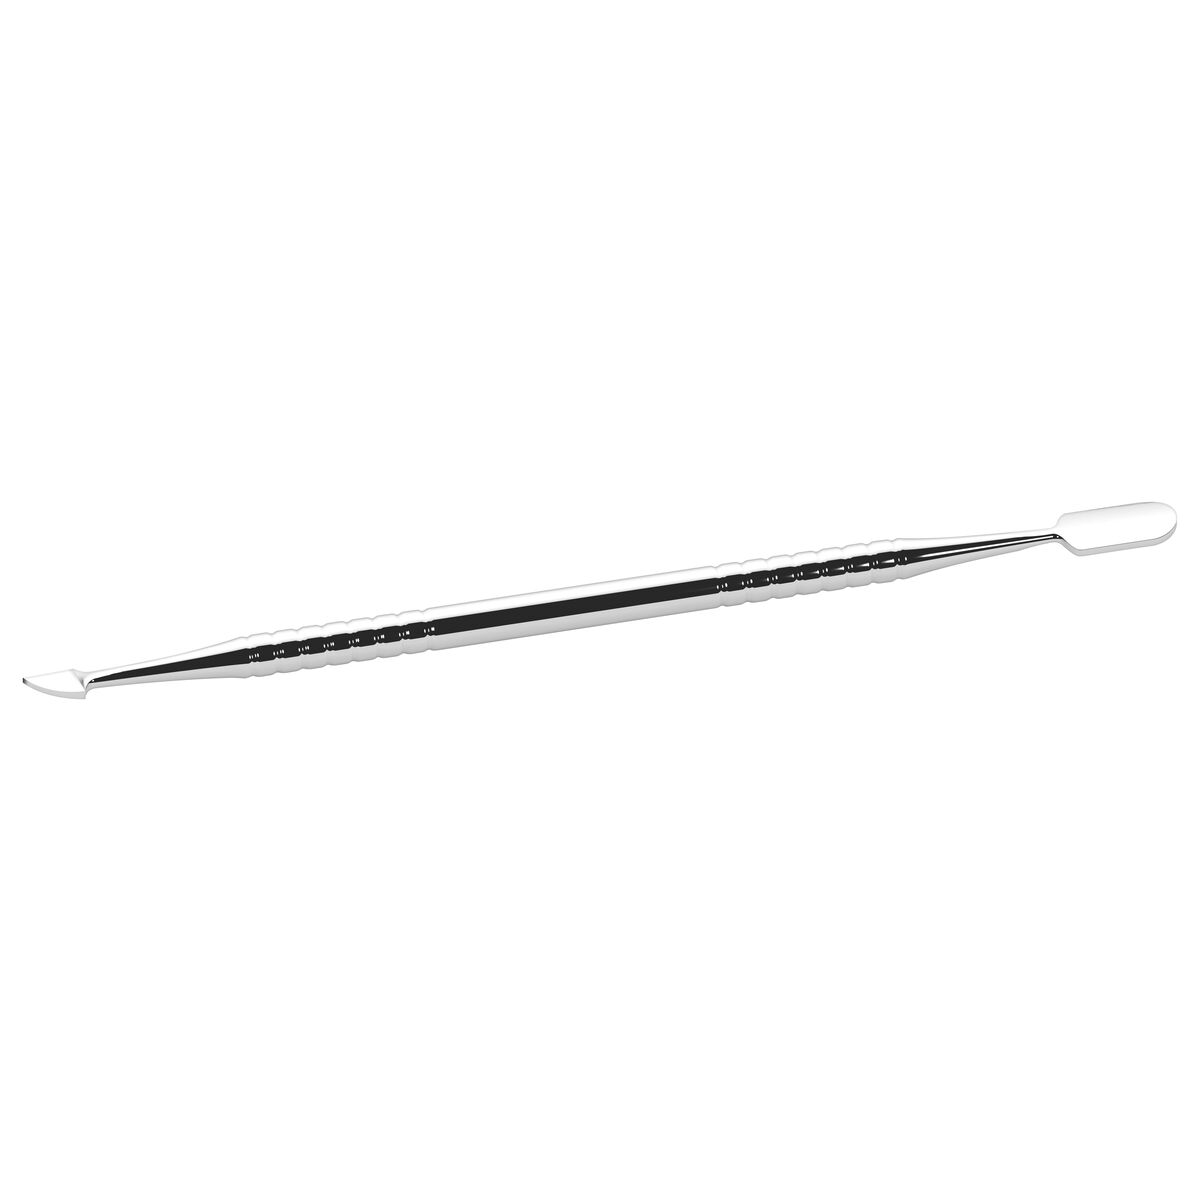 Tramontina stainless steel cuticle pusher and scraper